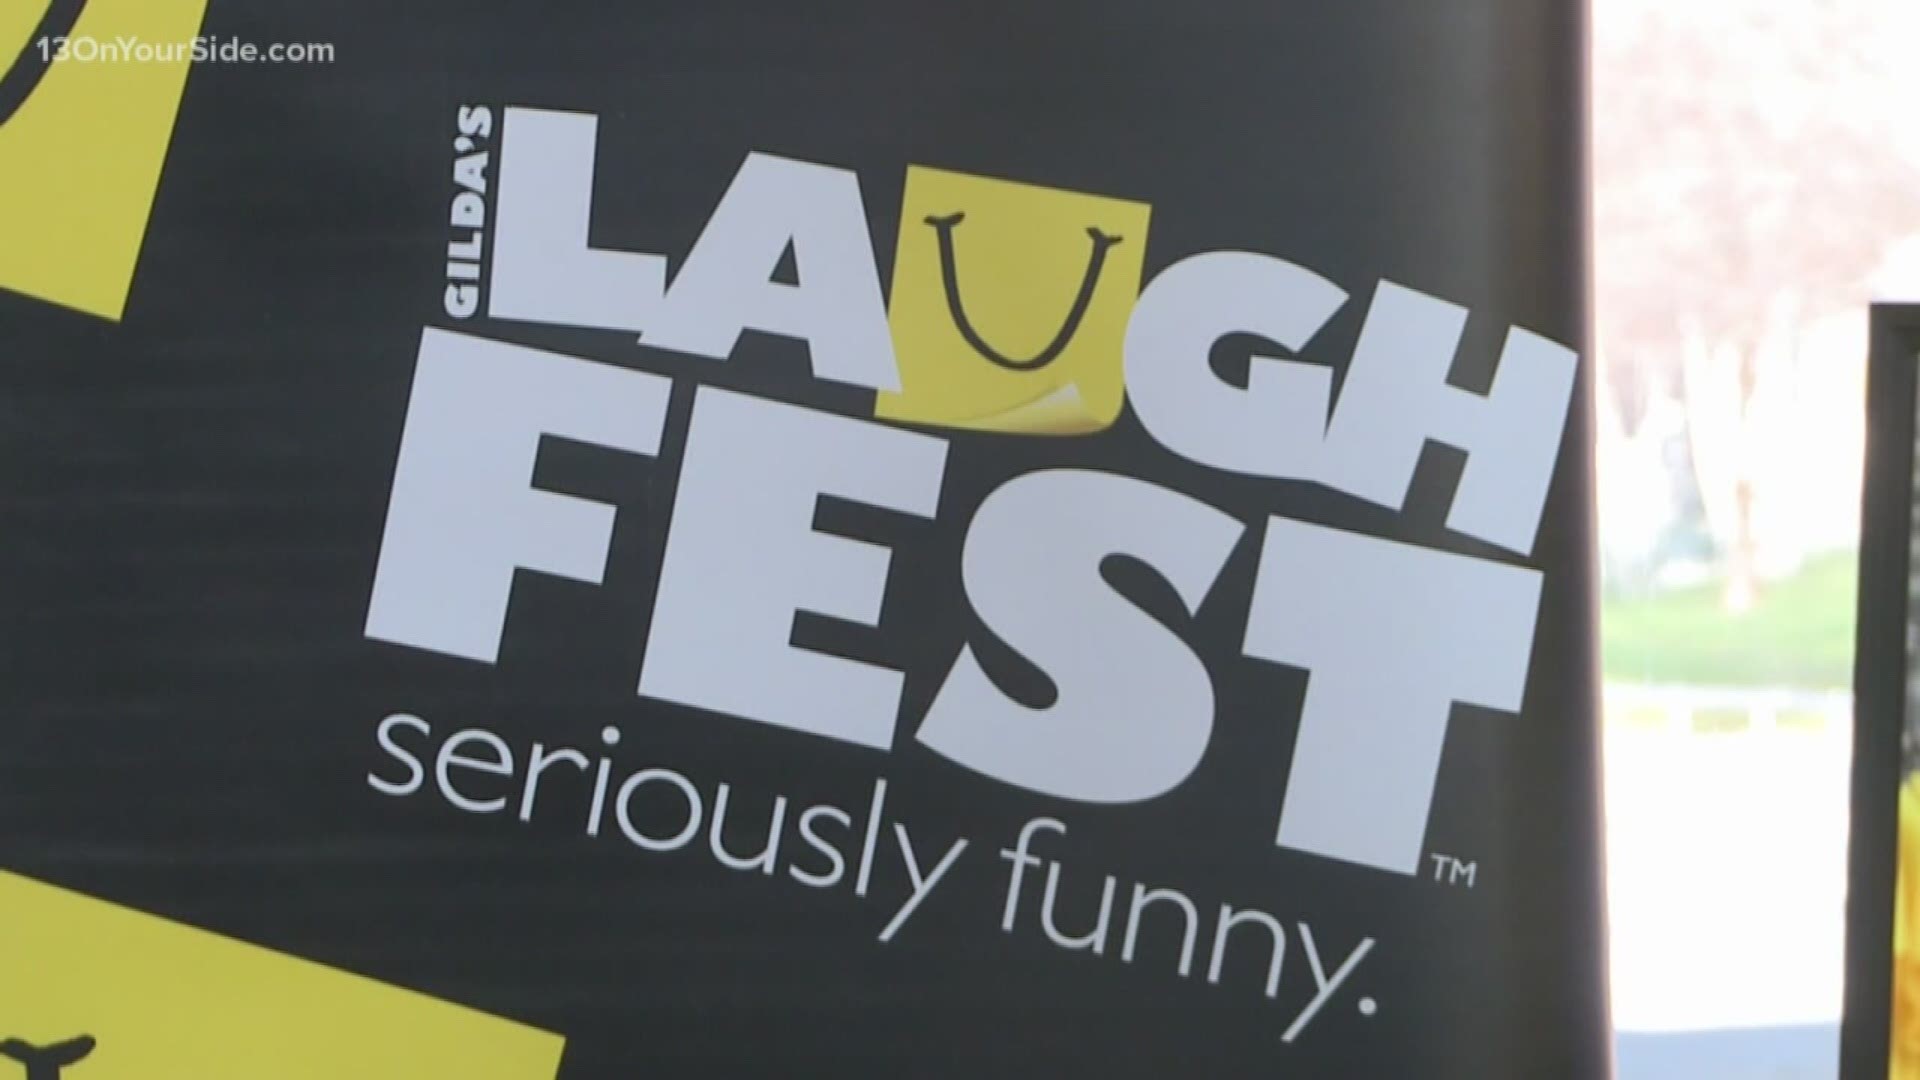 Applications opened Monday for individuals wishing to perform at free showcases during LaughFest's 10th anniversary.